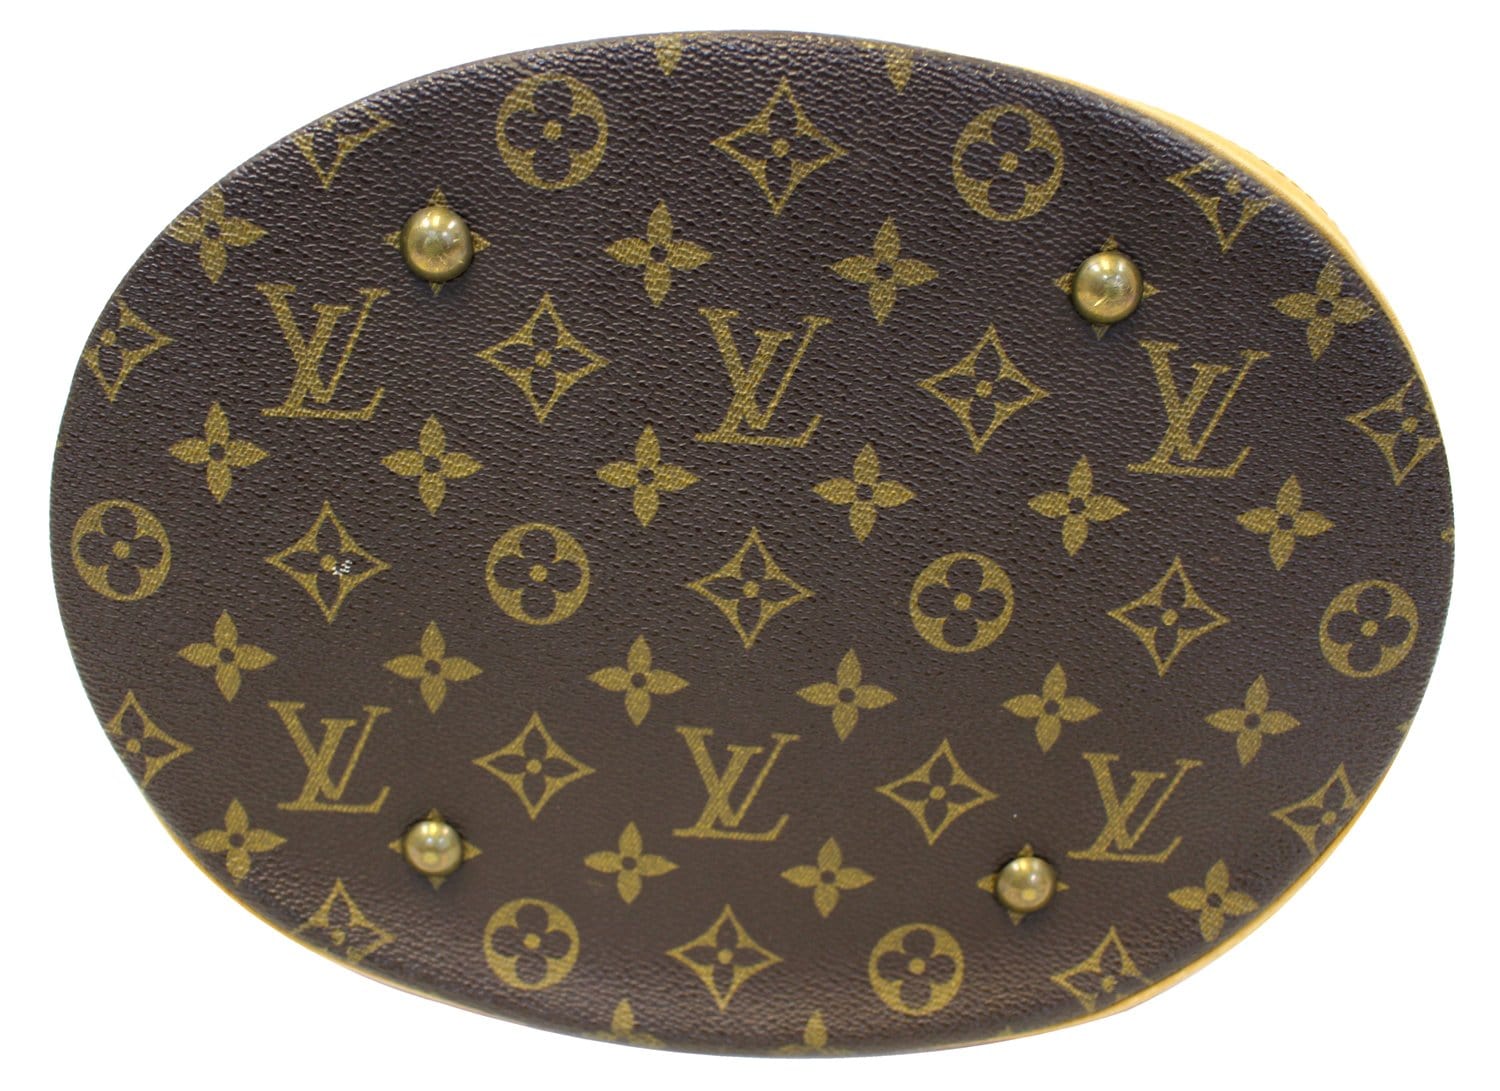 🌷SOLD🌷 Authentic Louis Vuitton Looping GM  Authentic louis vuitton, Louis  vuitton shoulder bag, Vuitton